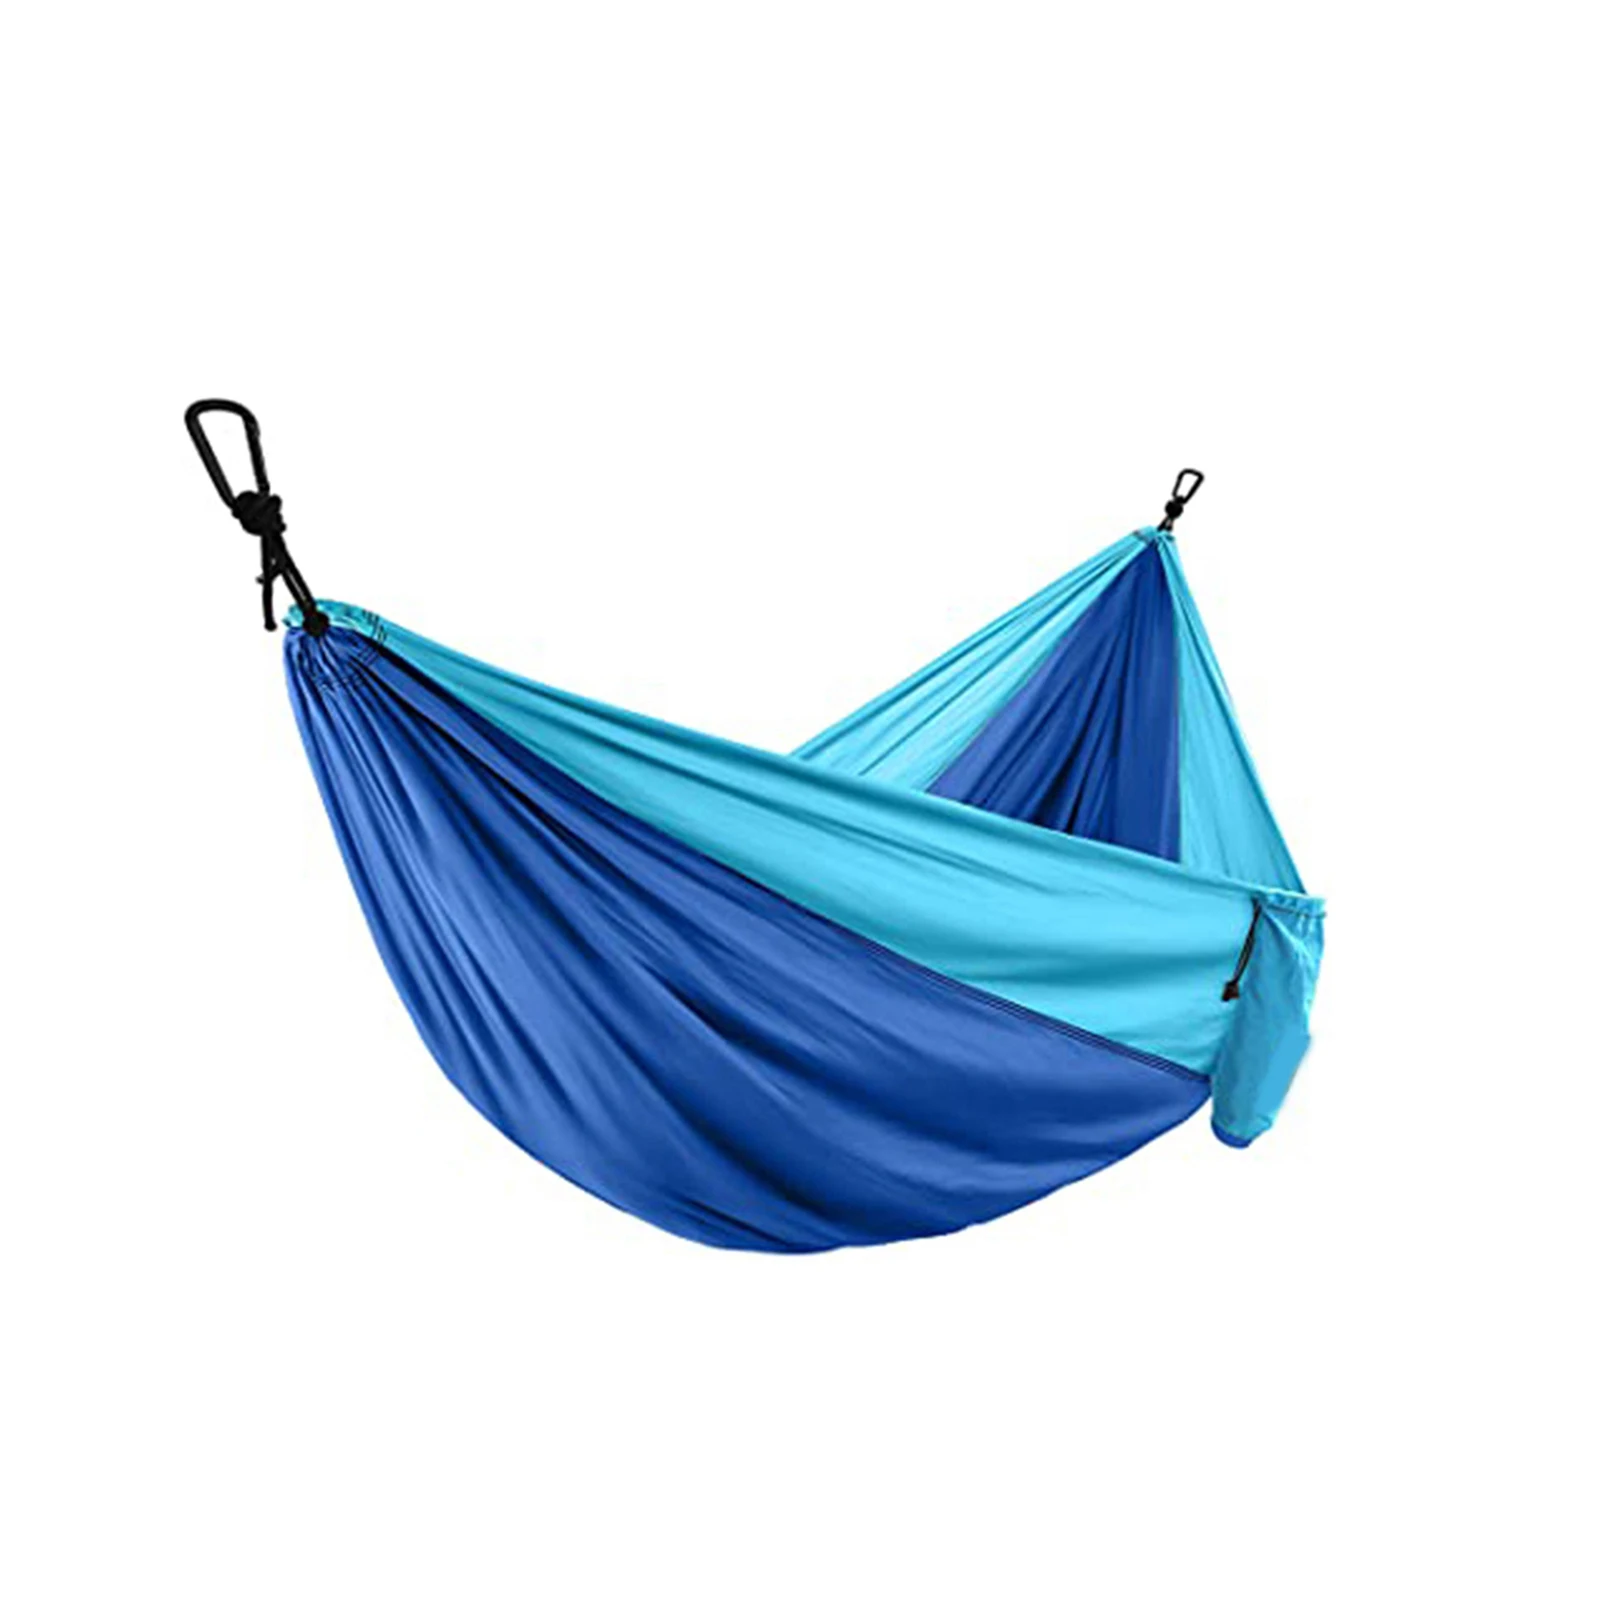 

Outdoor Camping Hammock with Sturdy Strap & Steel Carabiner Hammock for Fishing Lawn Garden